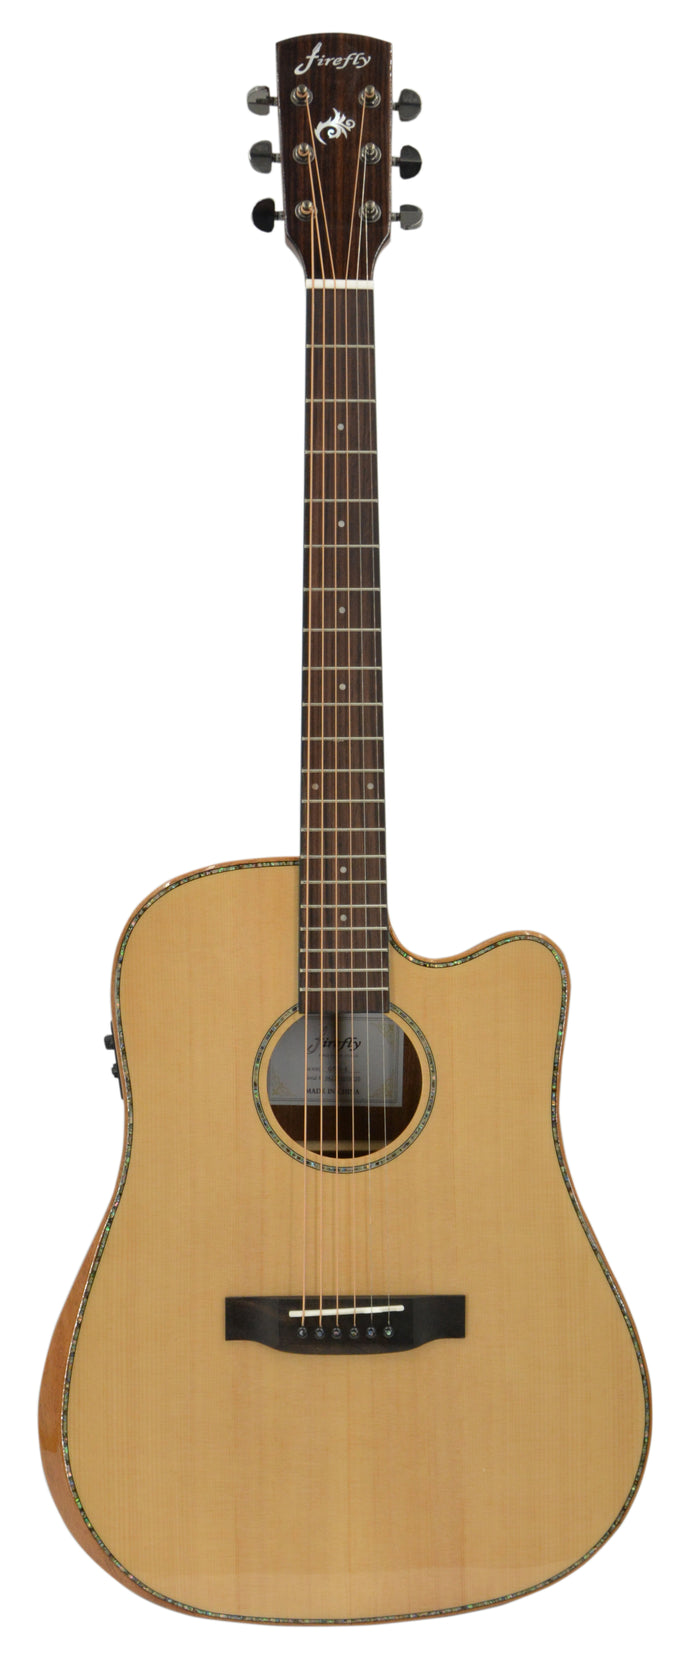 Promotion!Firefly New GT01-E Thinline Acoustic guitar – GUITARS GARDEN